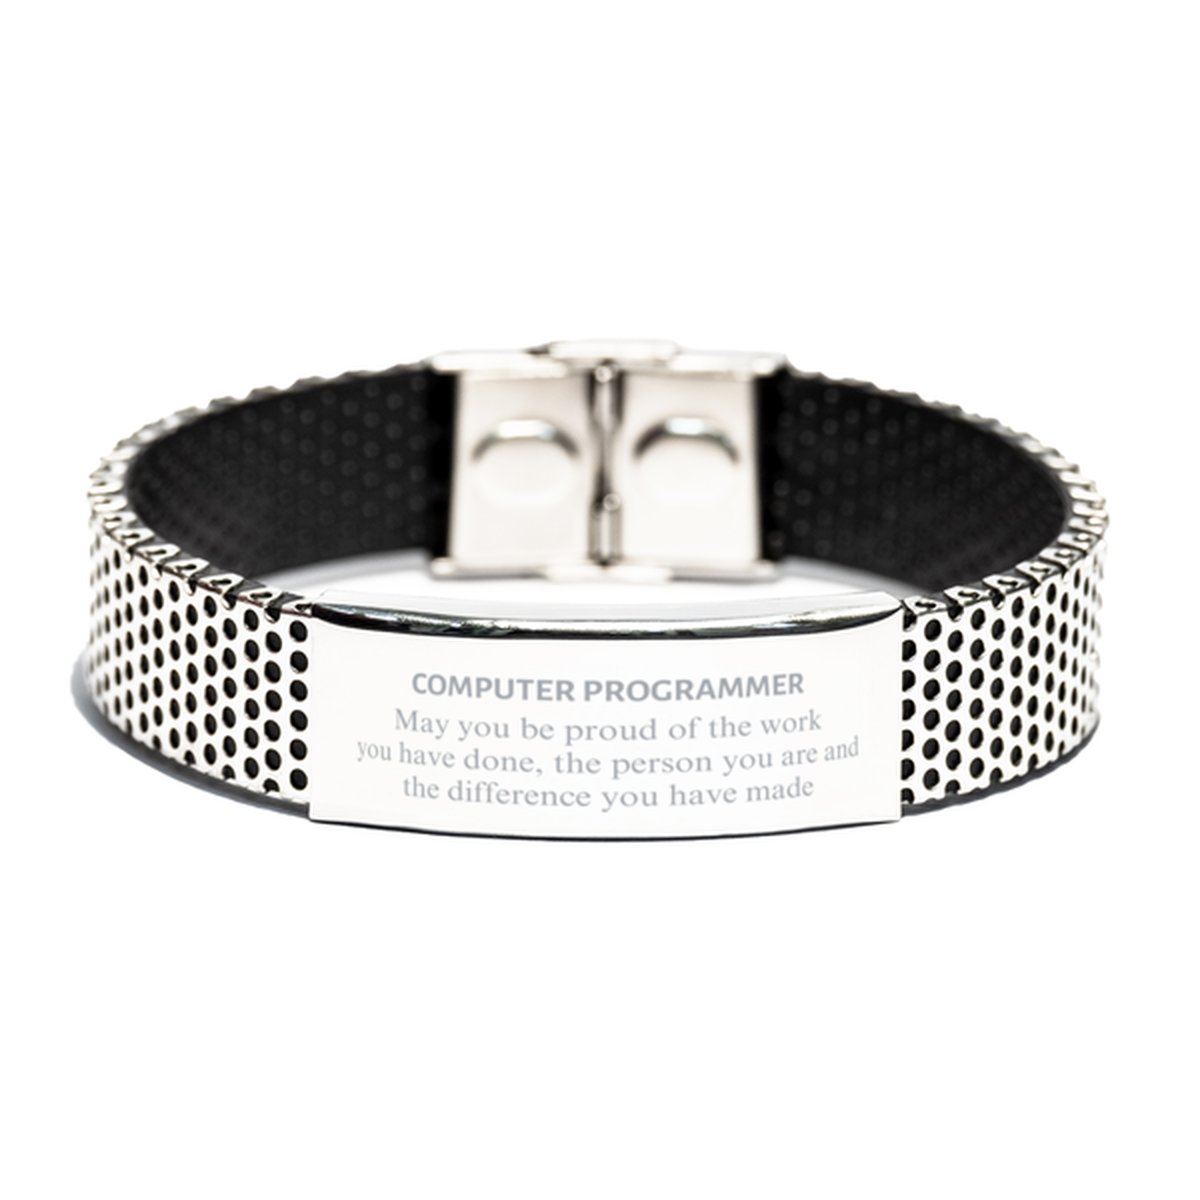 Computer Programmer May you be proud of the work you have done, Retirement Computer Programmer Stainless Steel Bracelet for Colleague Appreciation Gifts Amazing for Computer Programmer